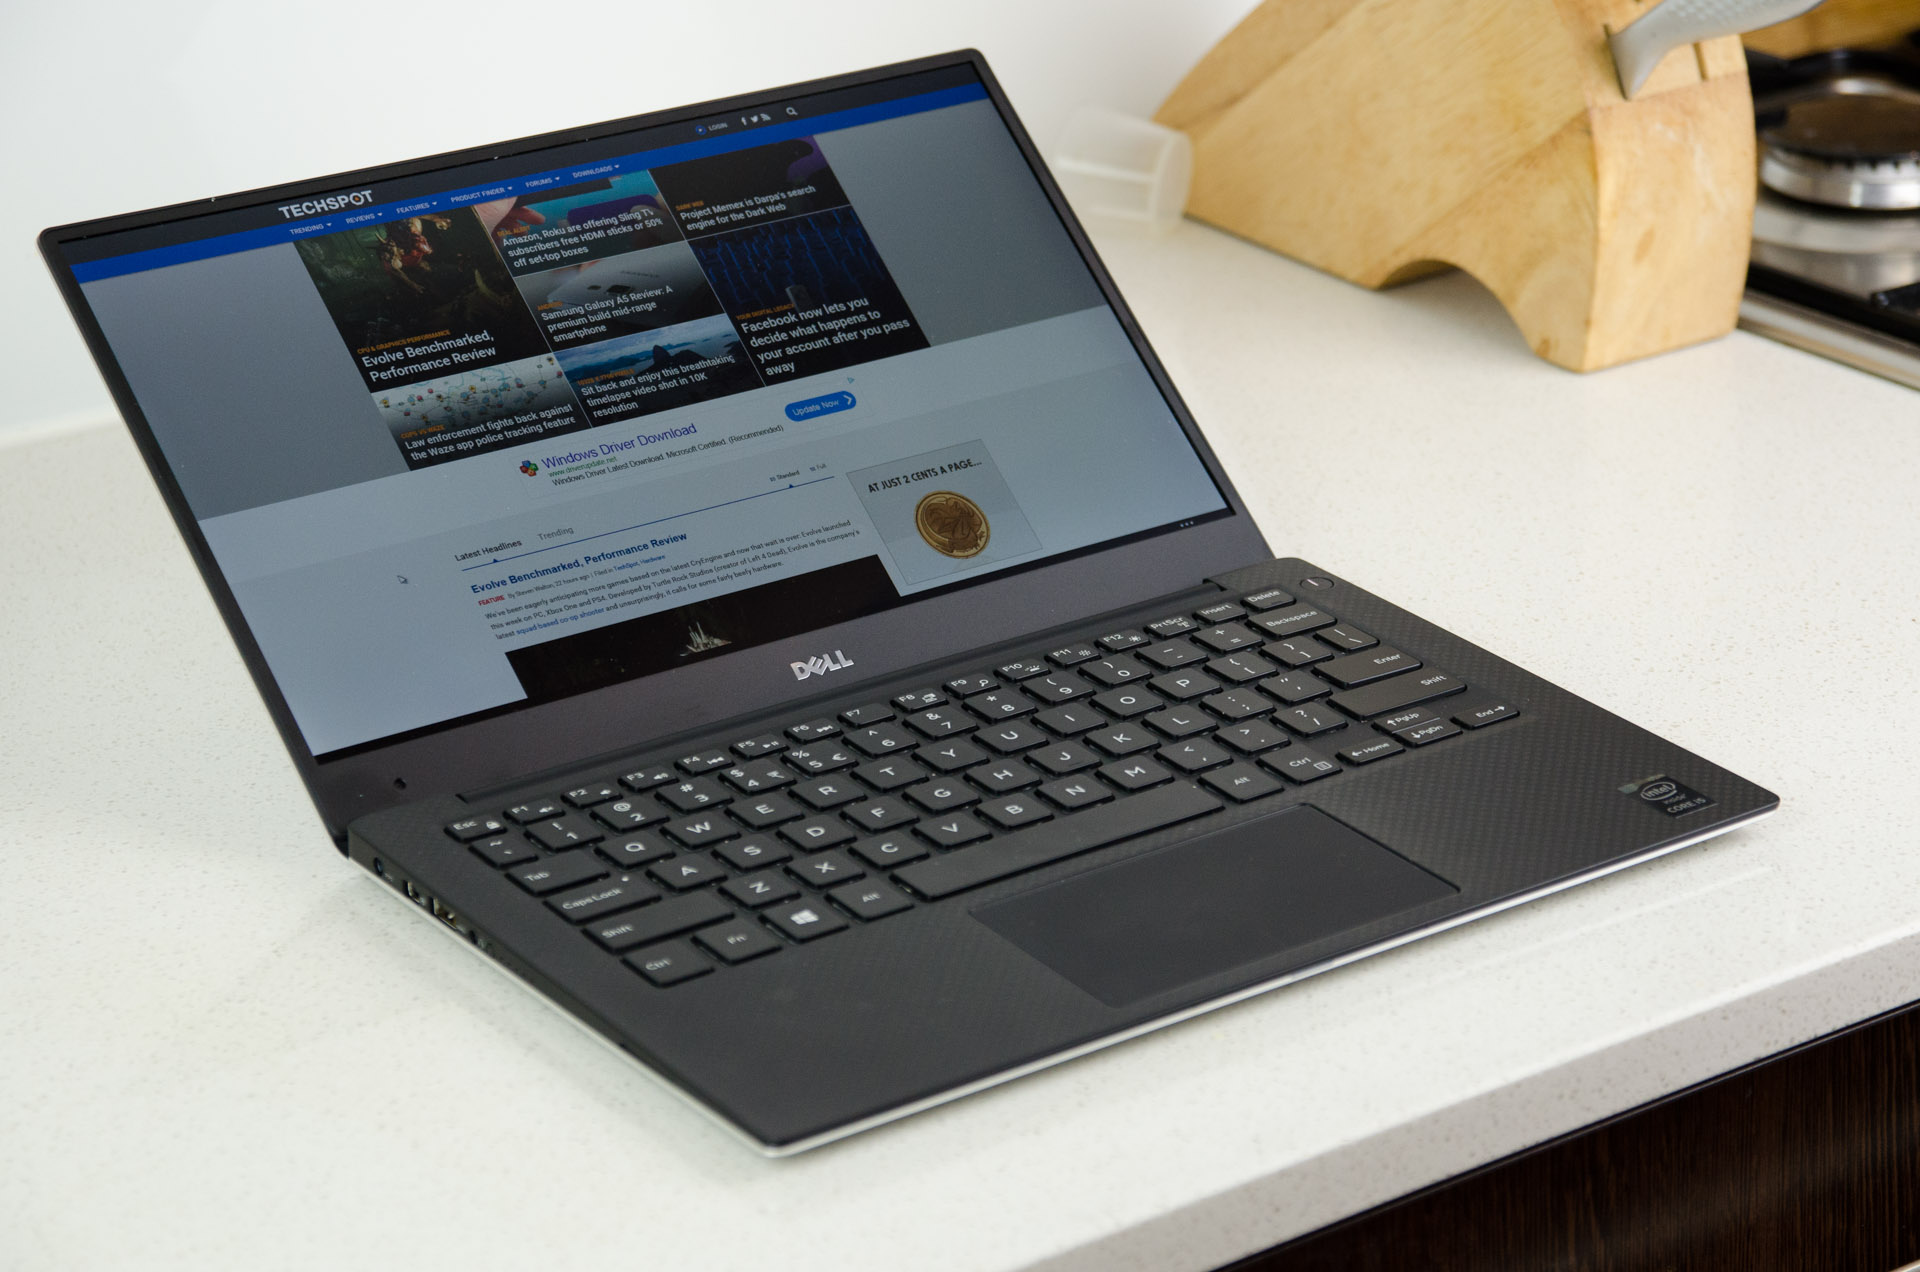 Dell XPS 13 (2015) Review | TechSpot